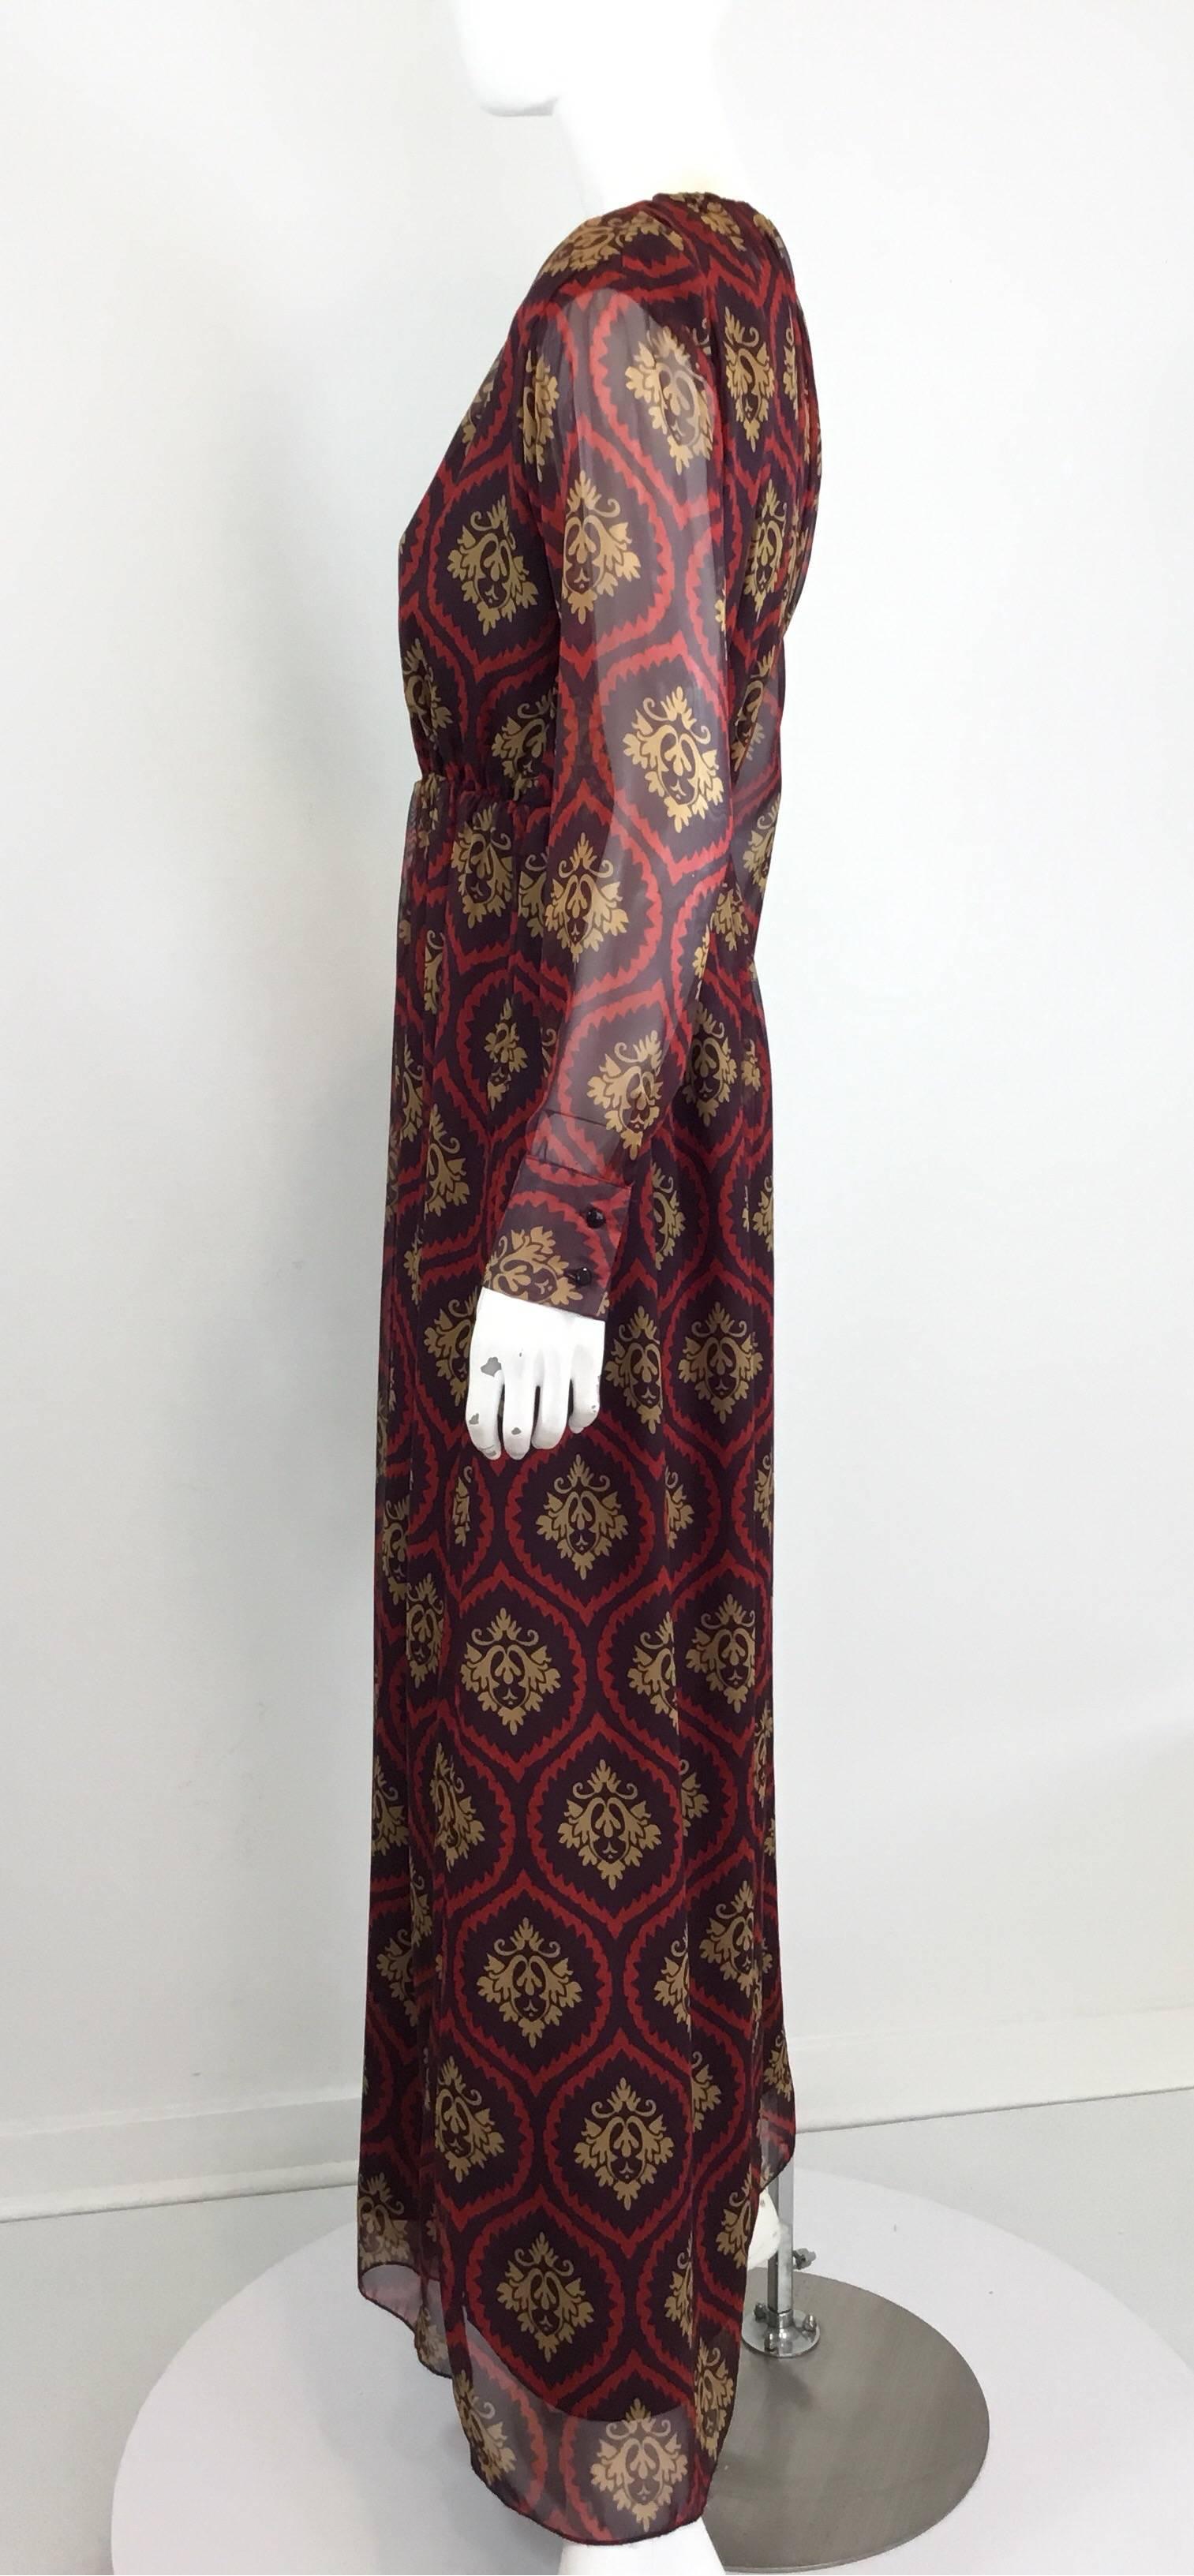 Gucci maxi dress featured in maroon with a red and tan print, plunging neckline, elastic band around the waist, and button closures for the sleeve cuffs. Made in Italy, labeled size M. Fully lined. Dress is in excellent condition with a few snags